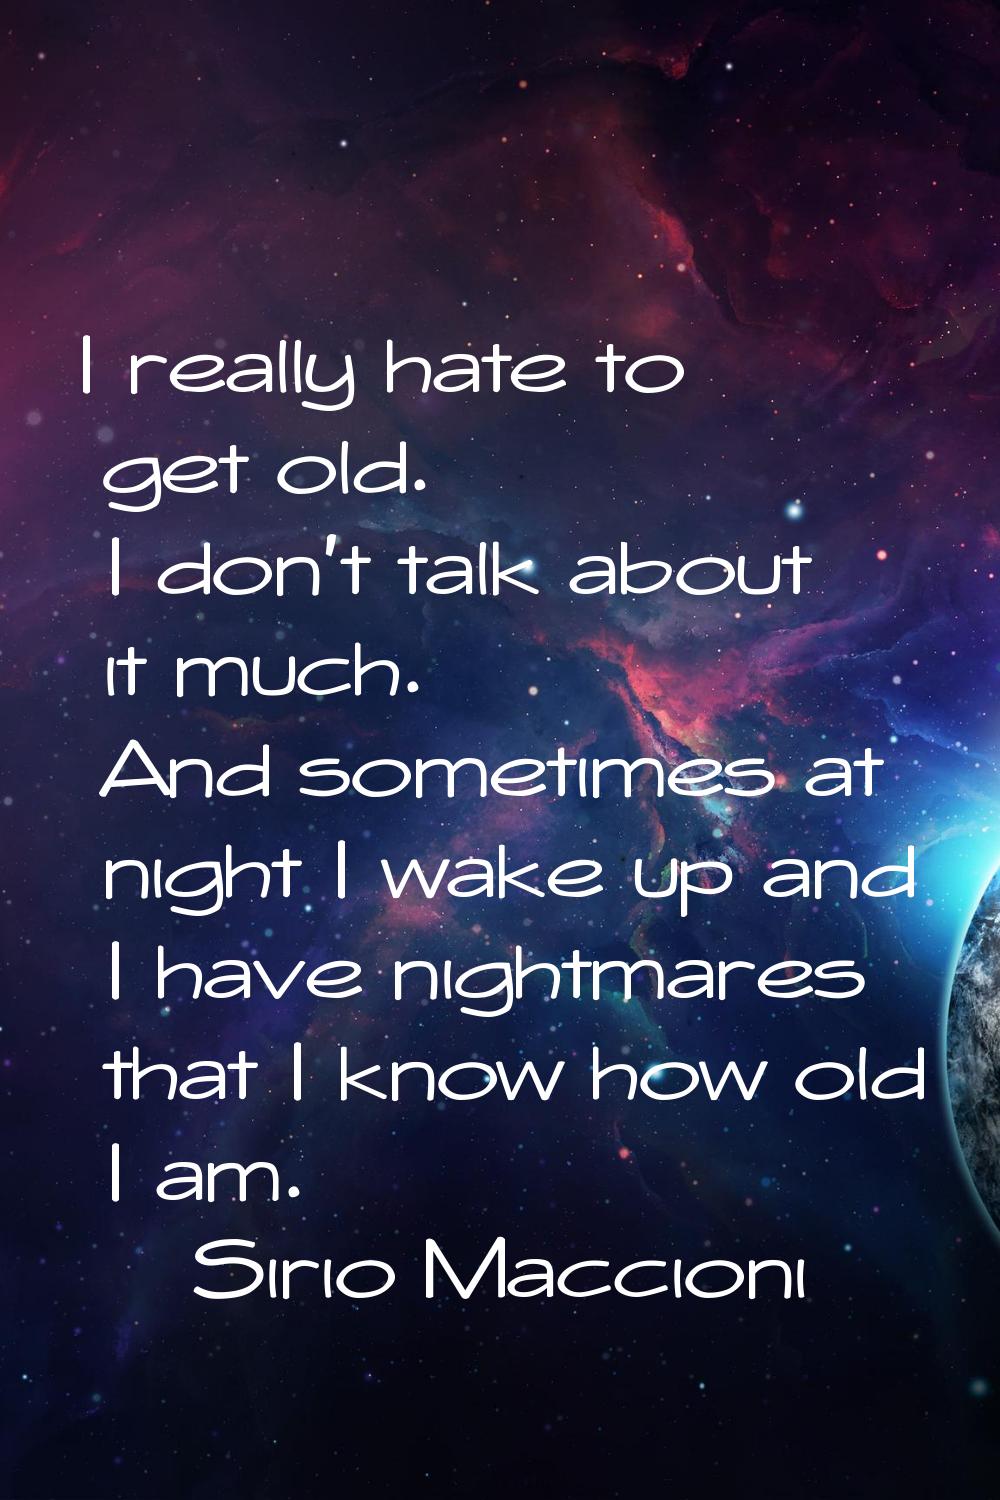 I really hate to get old. I don't talk about it much. And sometimes at night I wake up and I have n